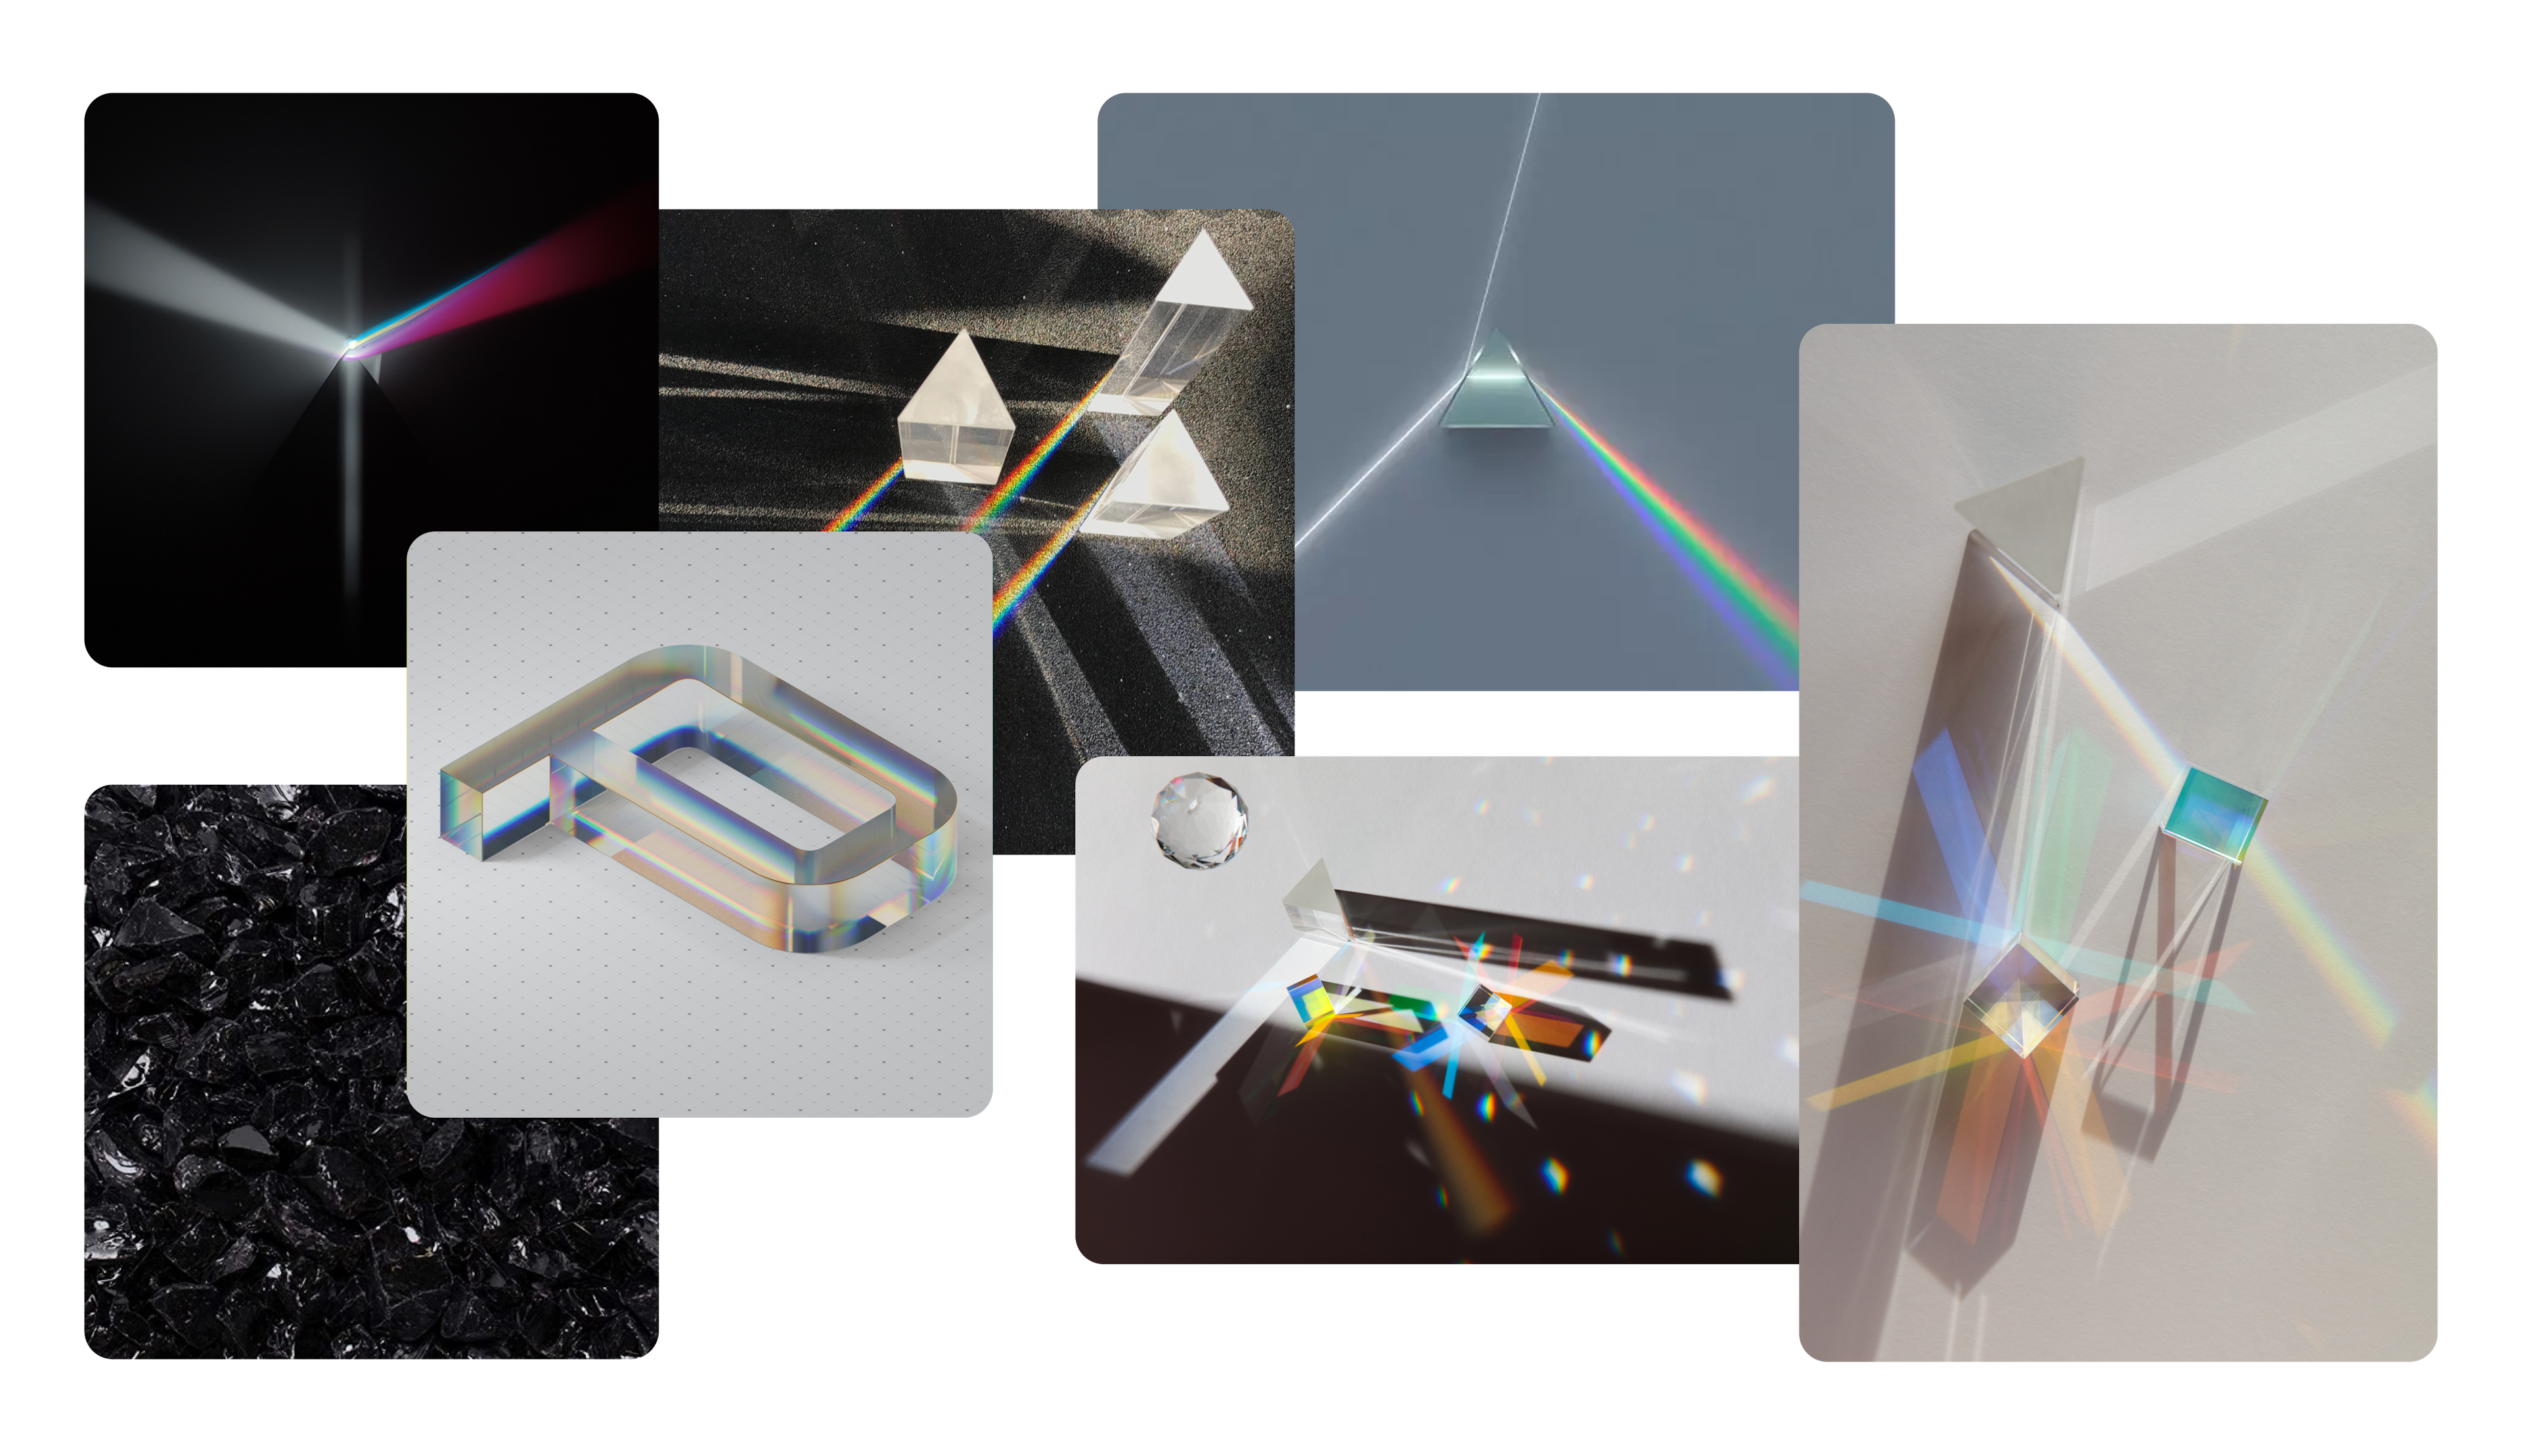 A mood board depicting many of the concepts that led to the creation of the Next.js Conf registration page. Prisms, beams of light, and rainbows create vivid, eye-catching visual elements.